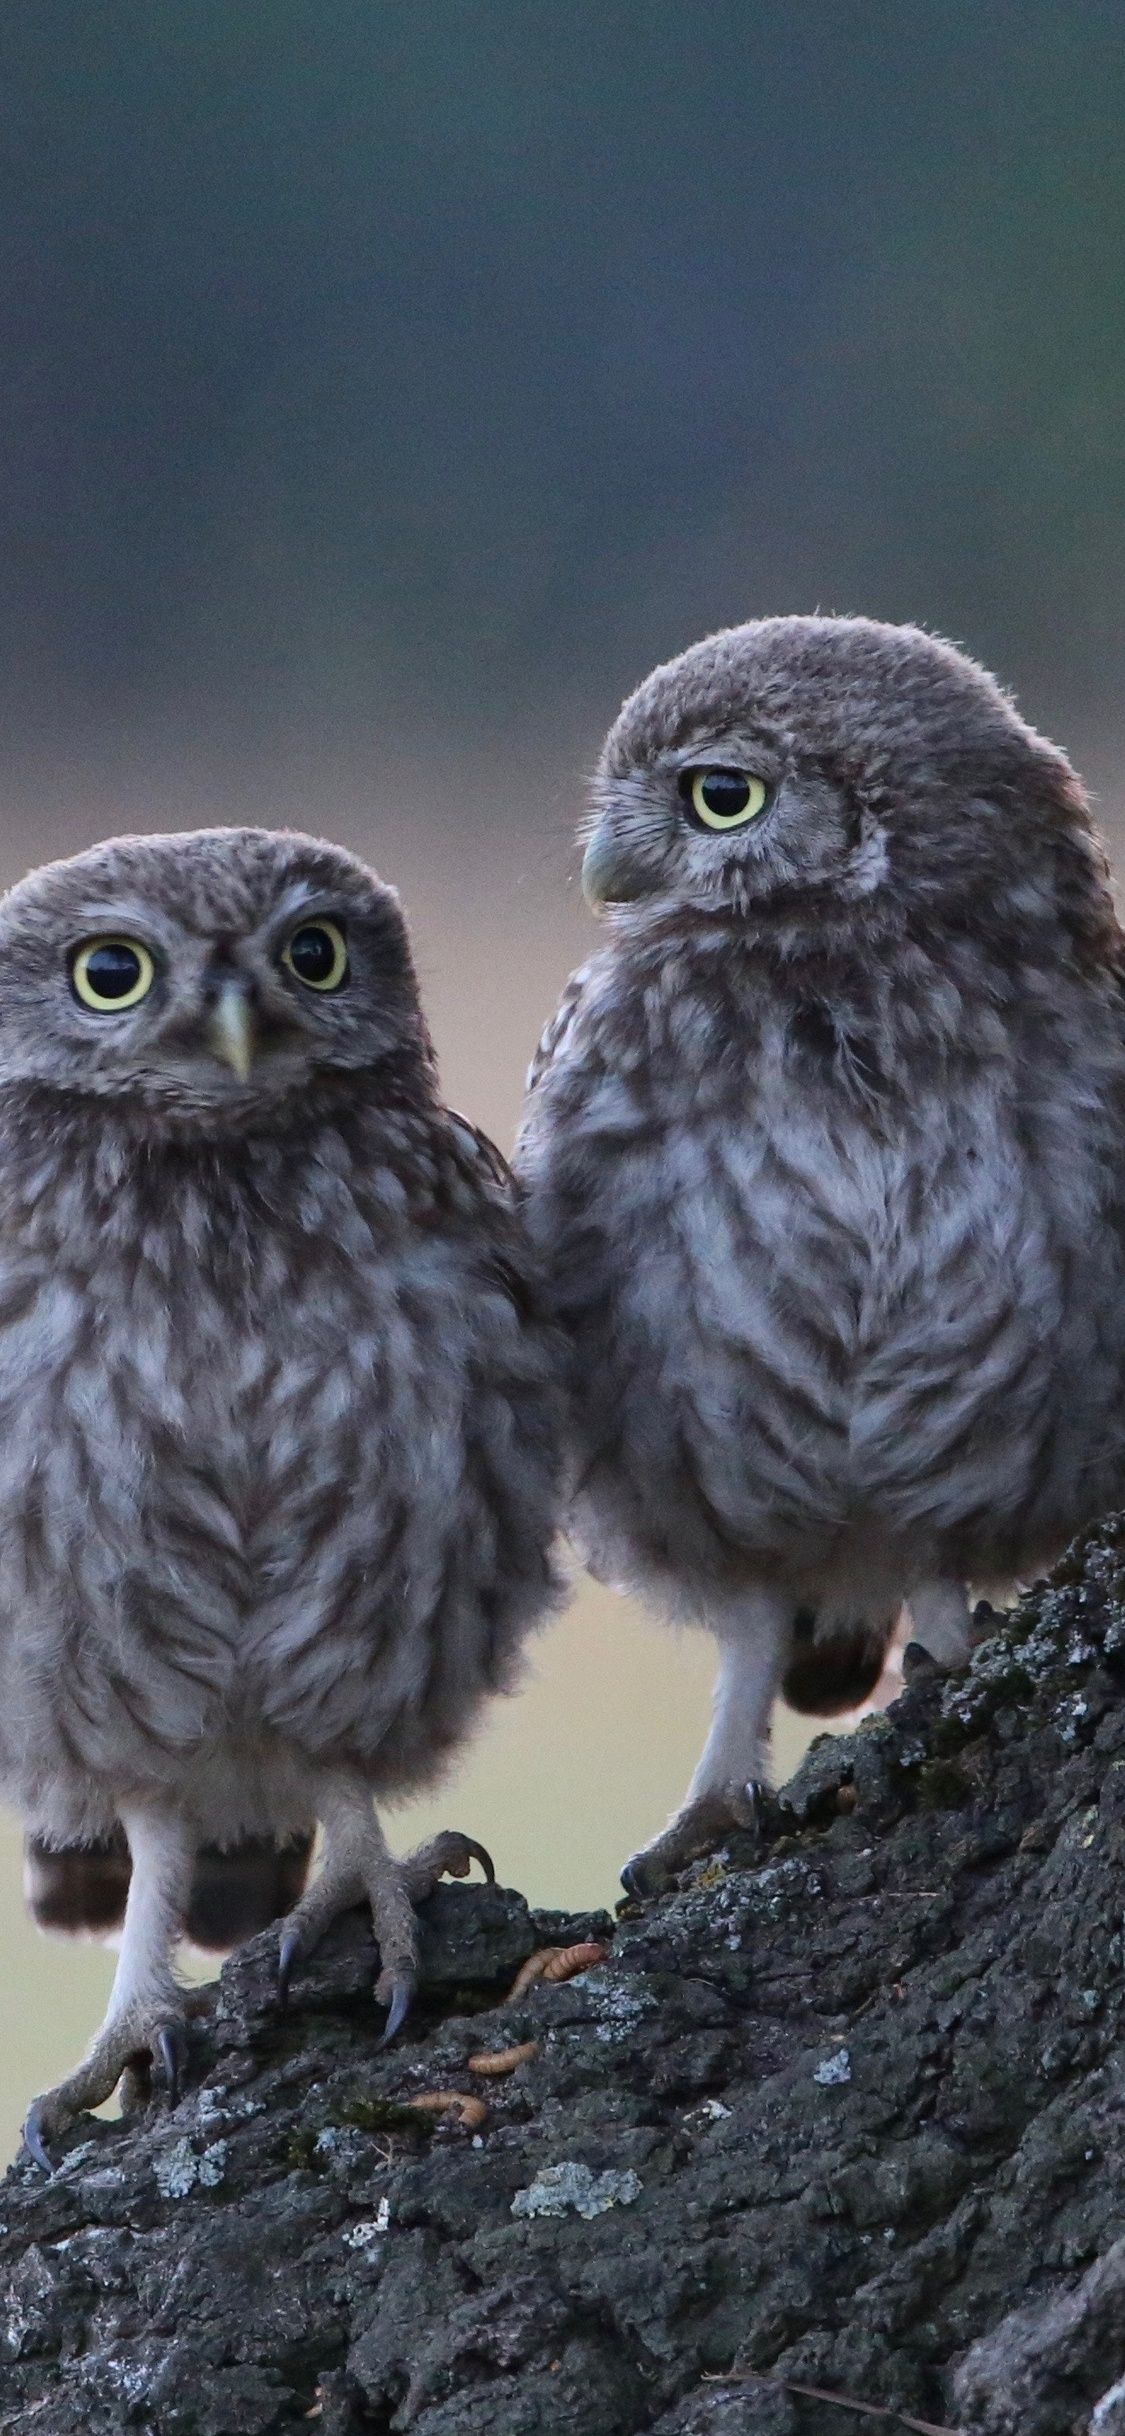 Two Owls Sitting On Branch 4k iPhone XS, iPhone iPhone